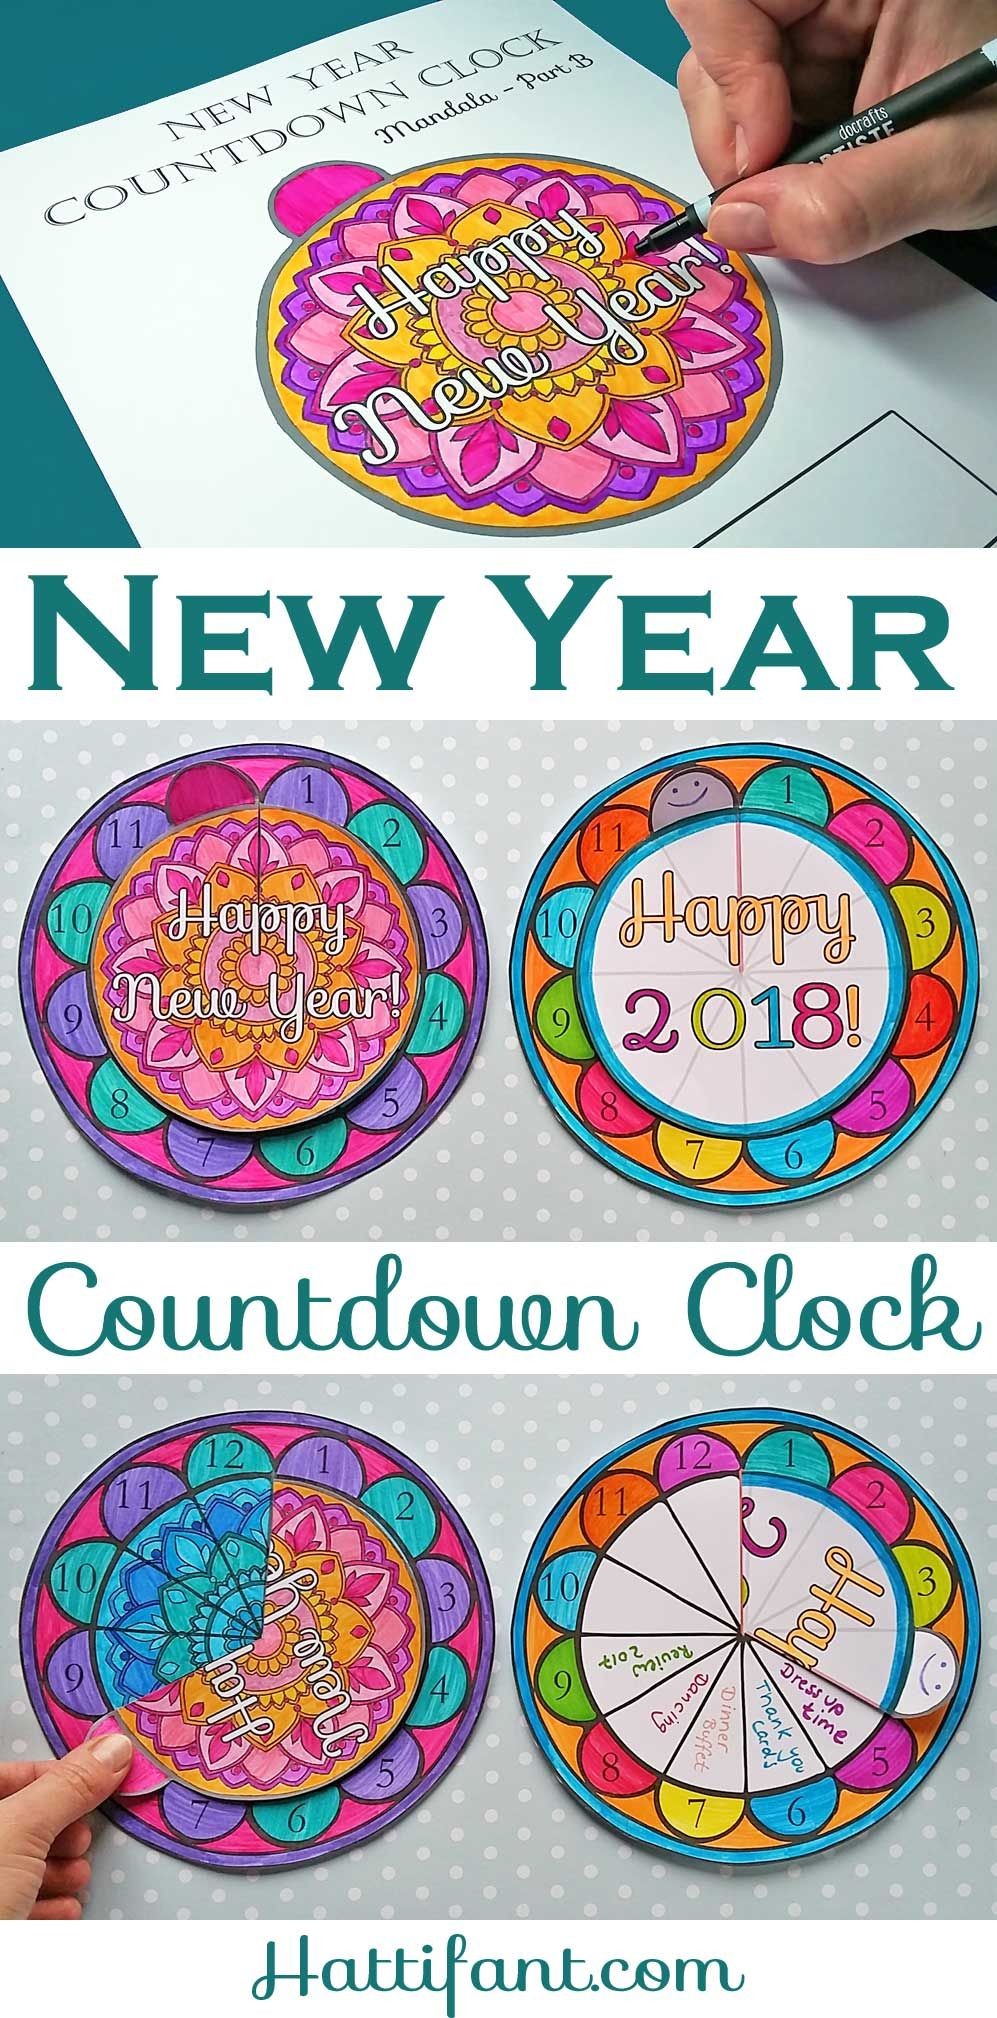 Papercraft Clock Hattifant S New Year Countdown Clock Paper and Coloring Craft